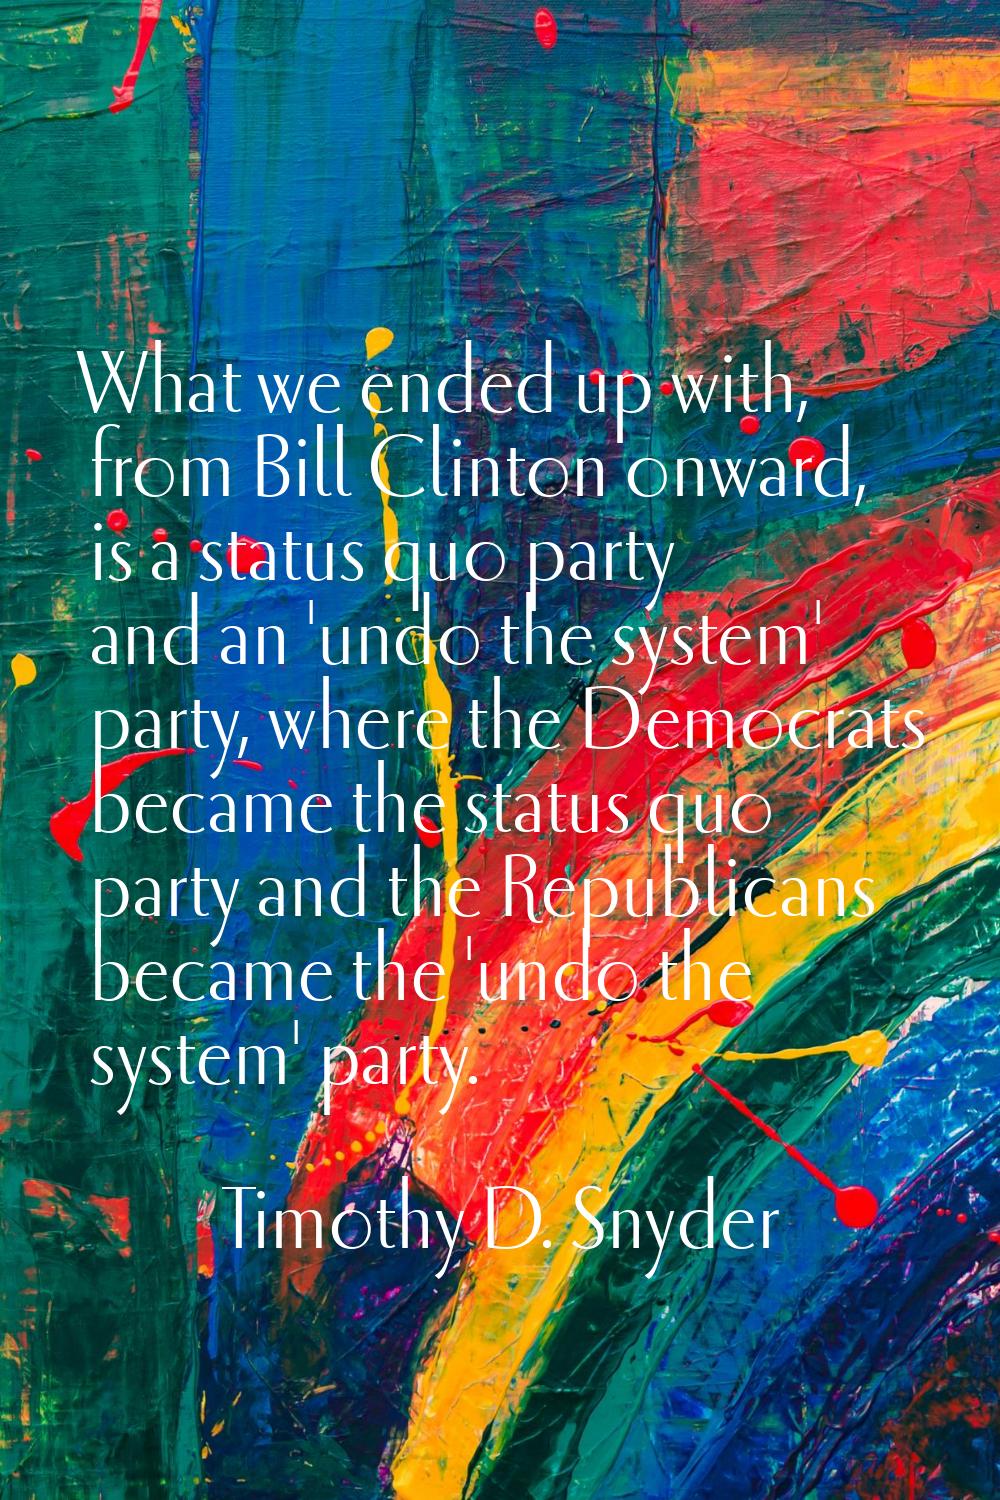 What we ended up with, from Bill Clinton onward, is a status quo party and an 'undo the system' par